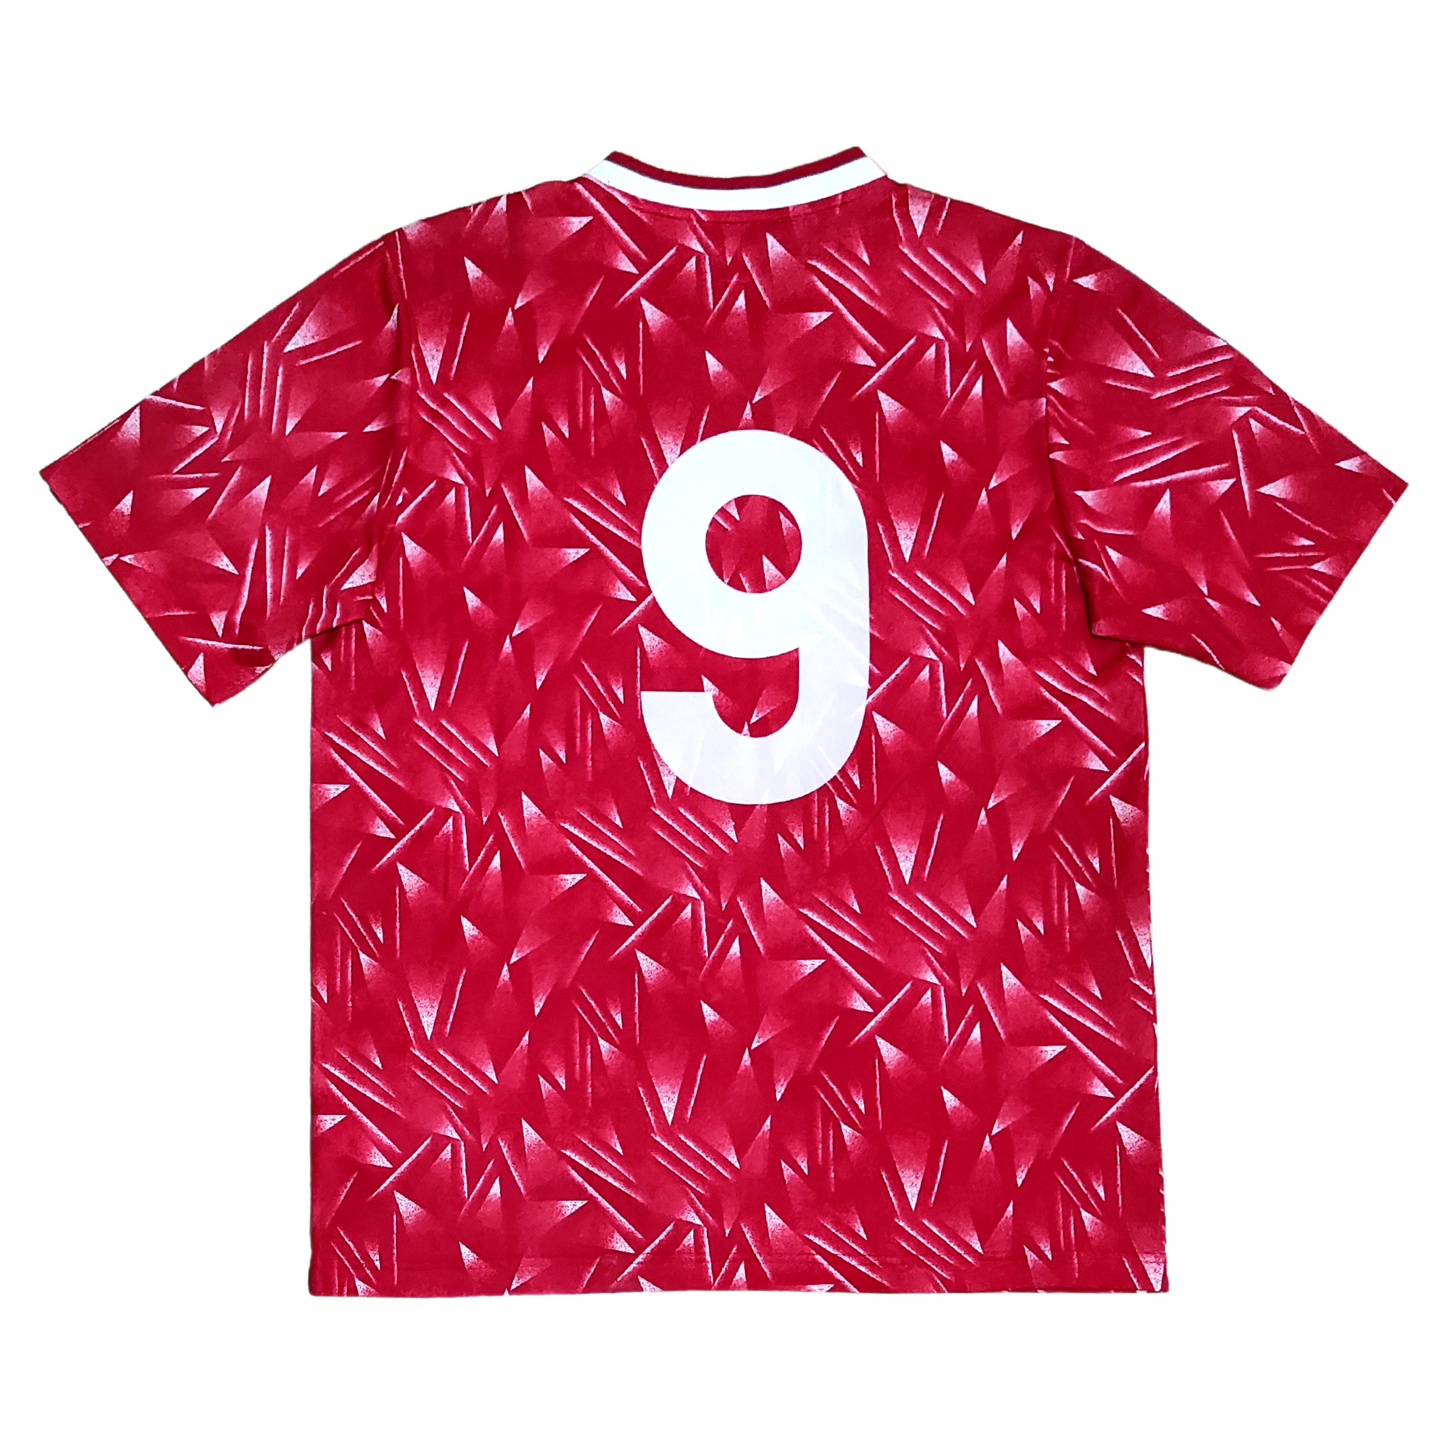 Liverpool Home Reproduction Shirt 1989-1991 #9 (L)